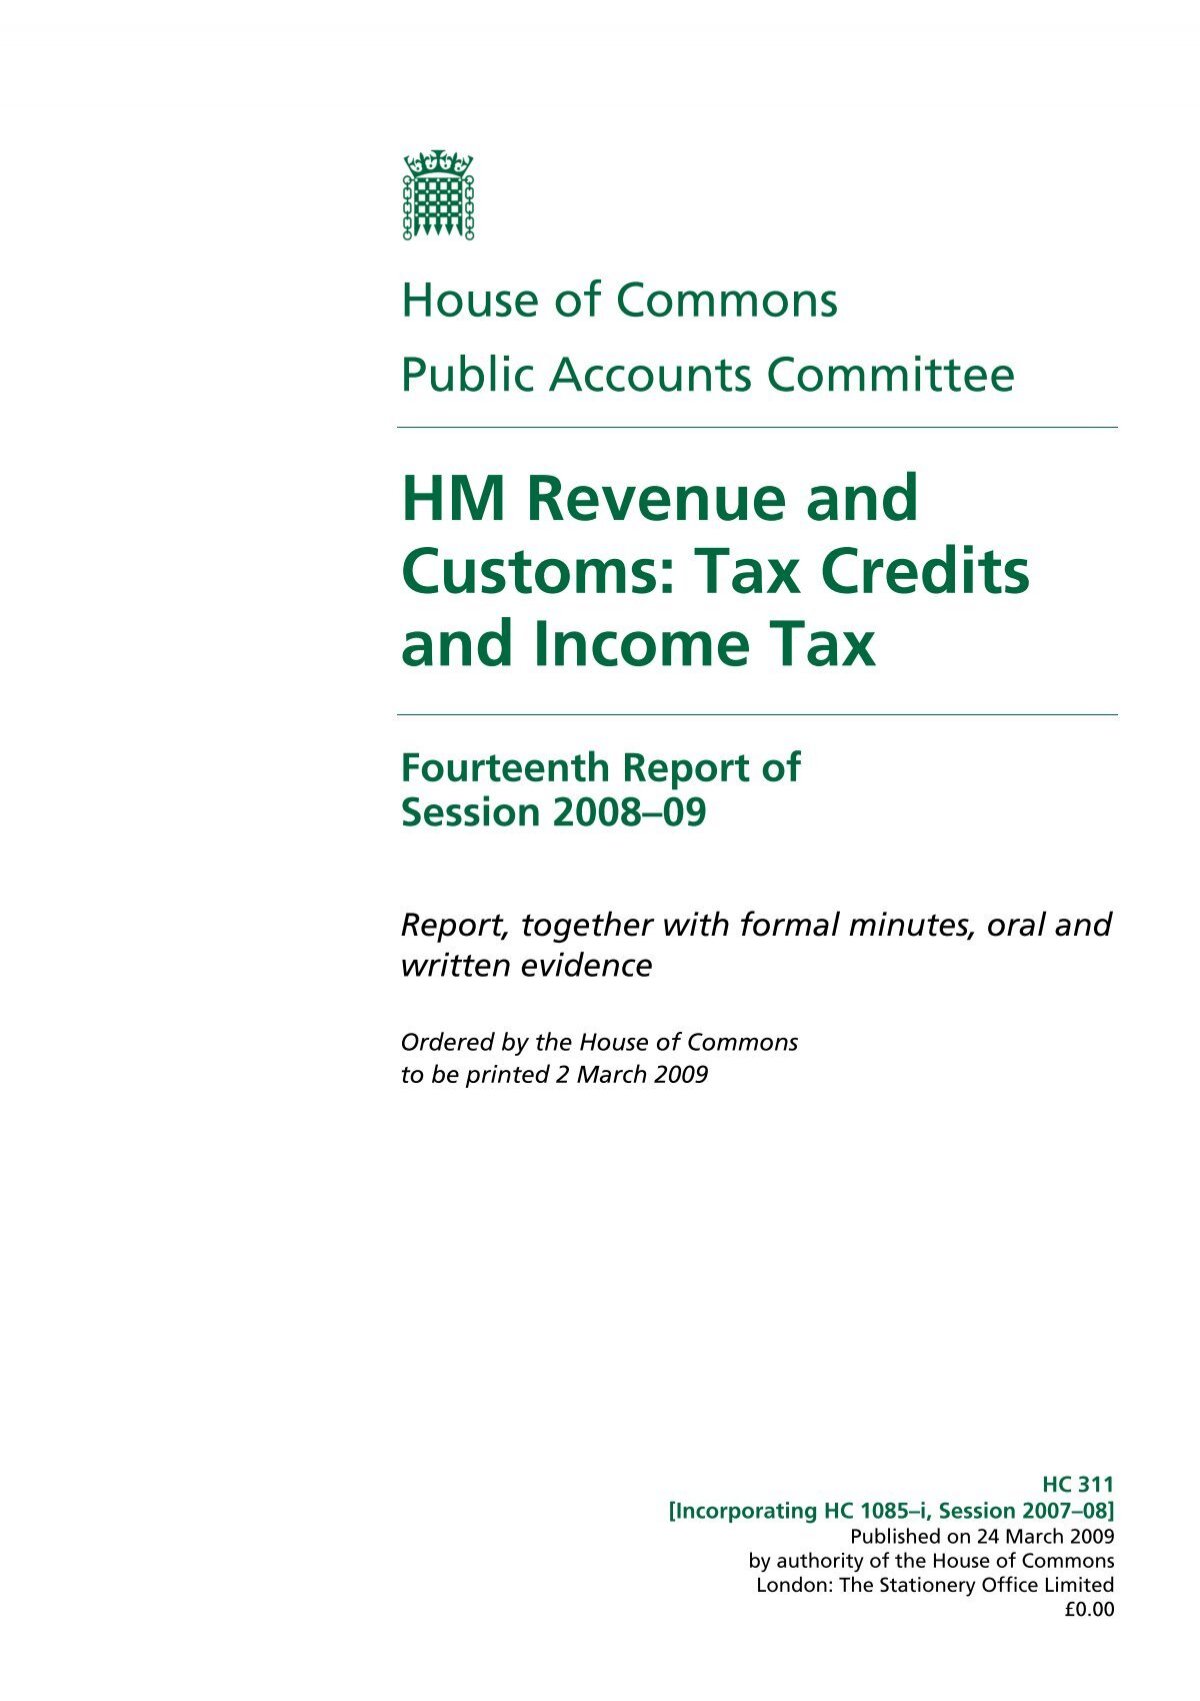 HM Revenue And Customs Tax Credits And Revenue Benefits